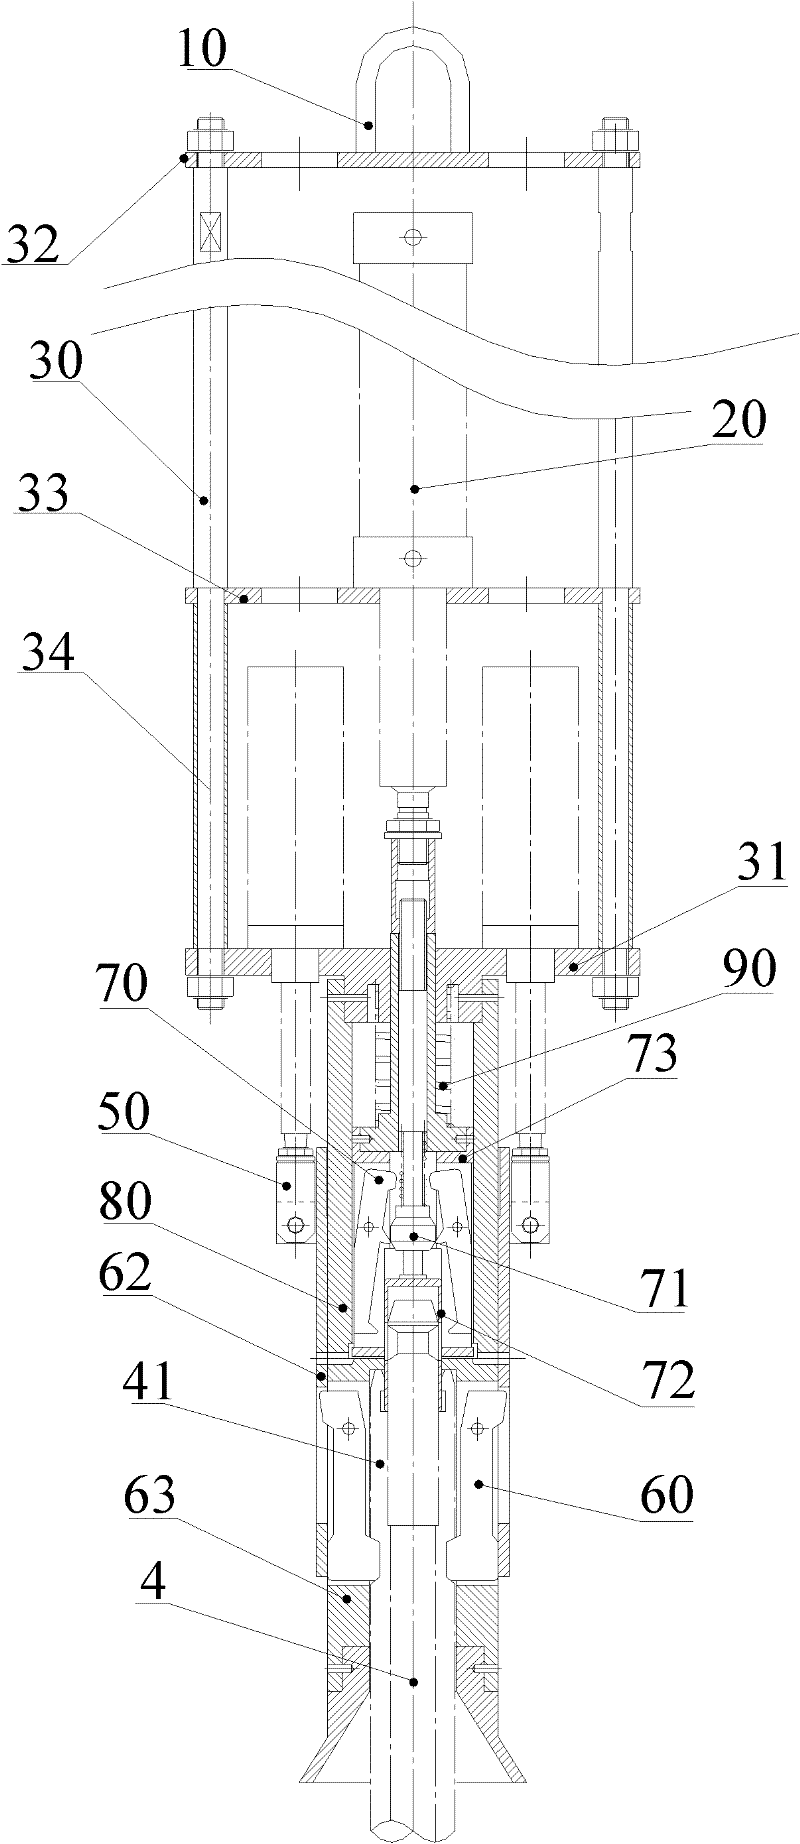 Emergency tripping device of reactor control rod assembly